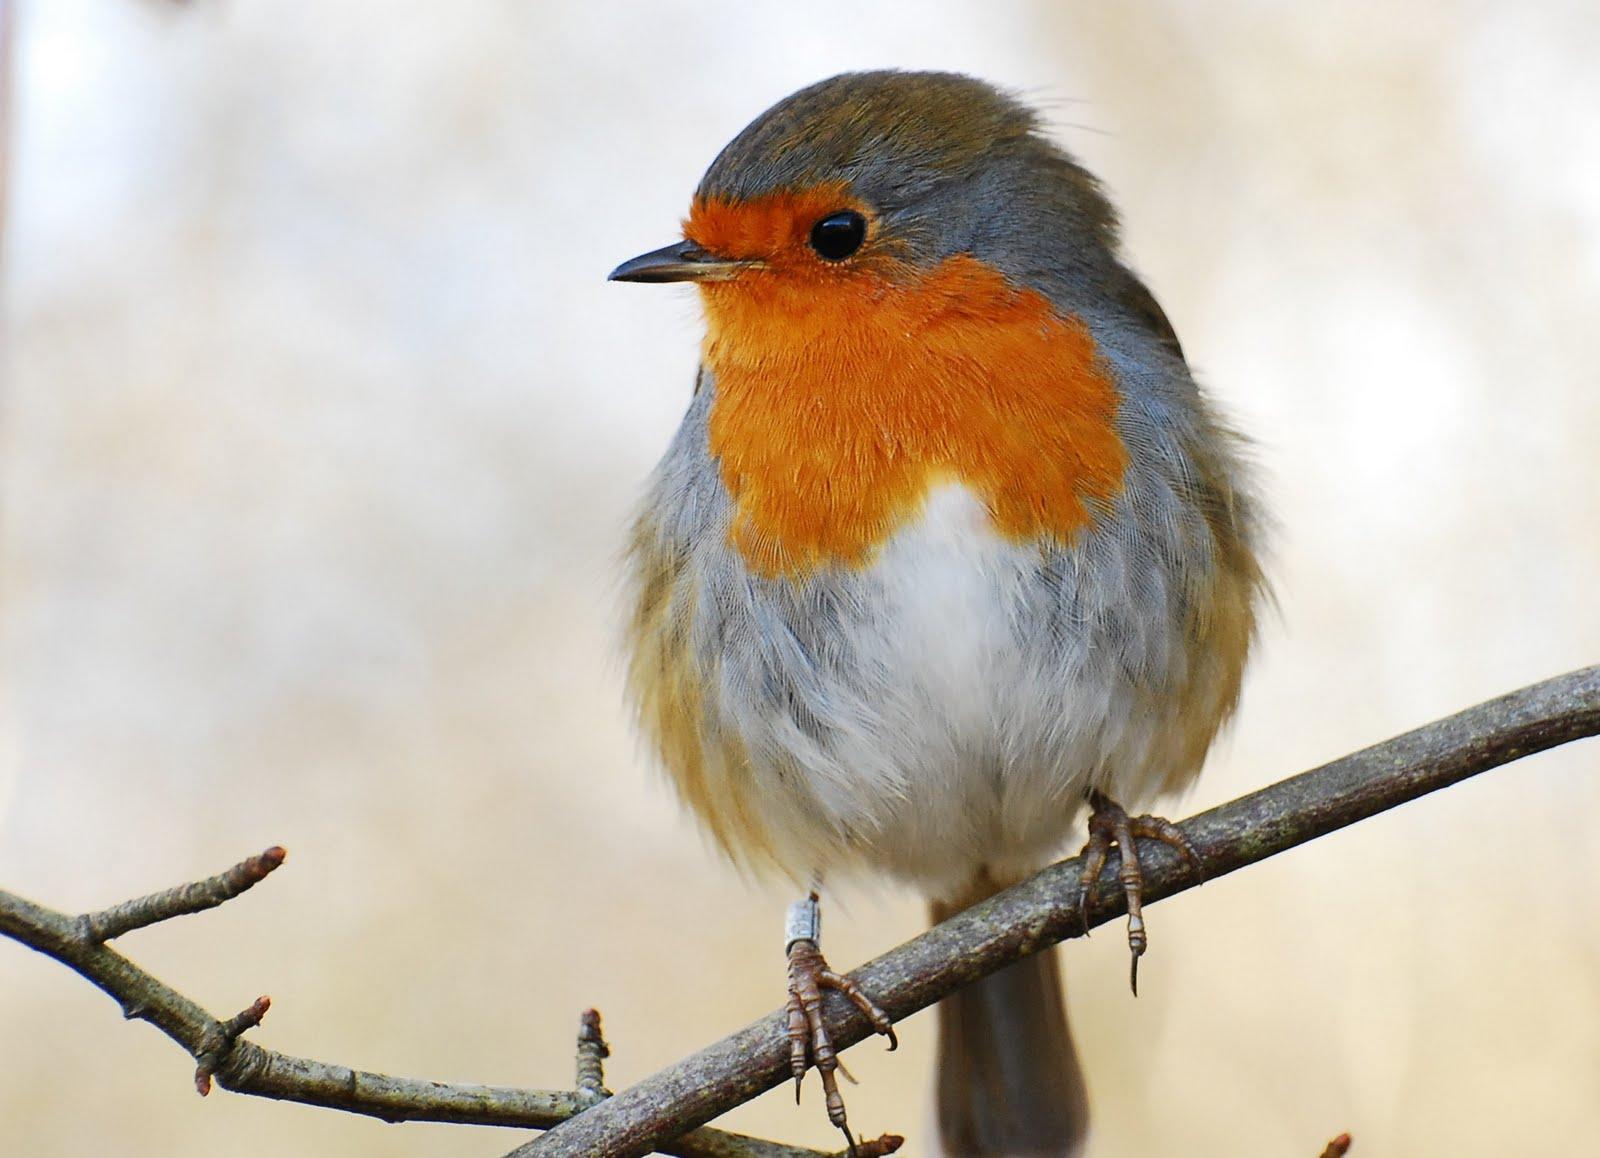 Gallery of Wallpaper of a Robin on Animal Picture Society